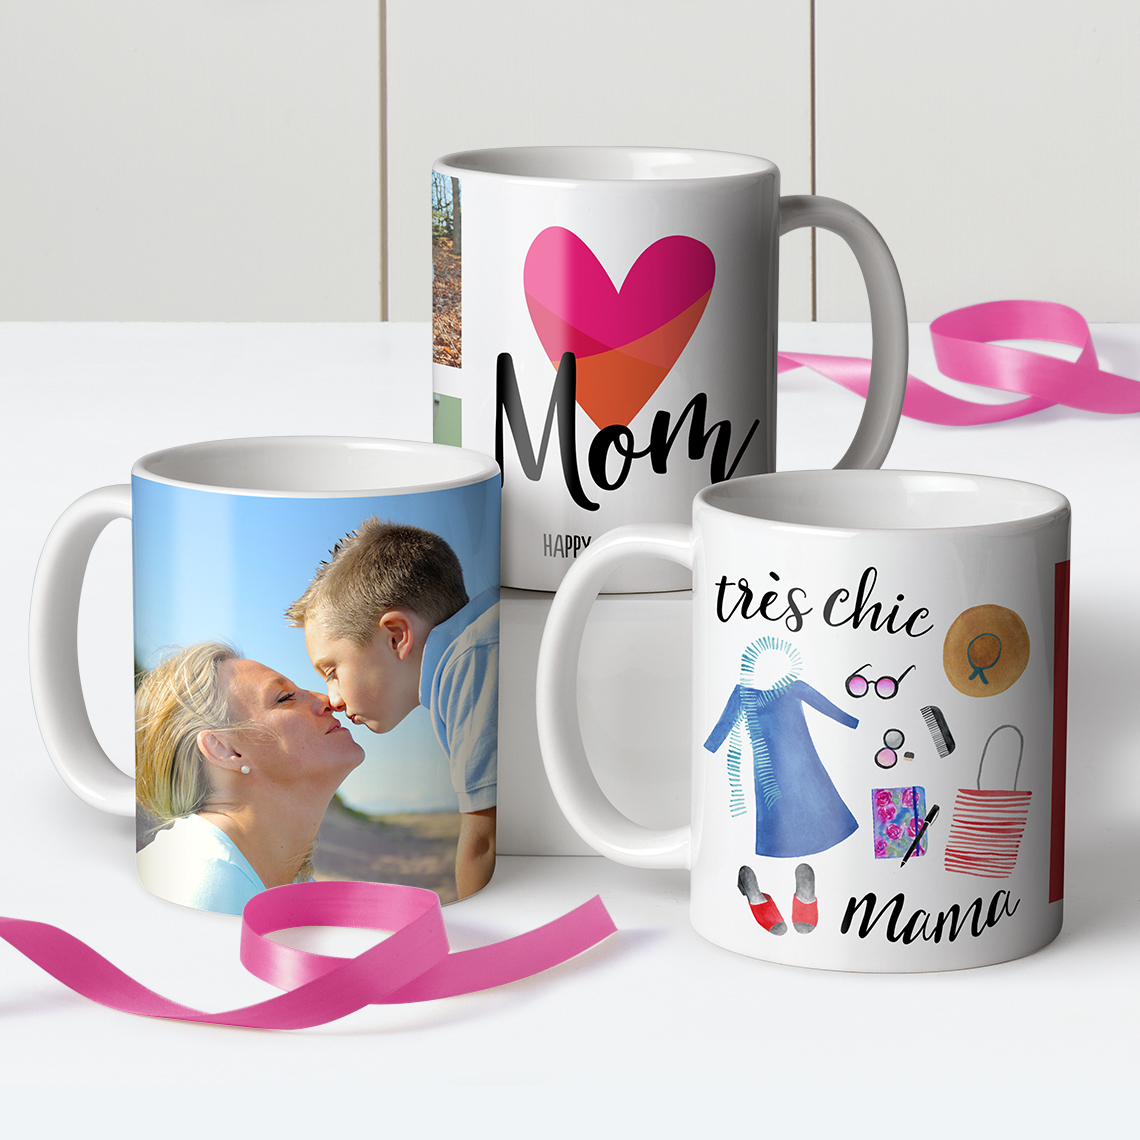 Custom Photo Coffee Mugs, 11 Oz or 15 oz, Personalized Mugs with Picture,  Text, Name - Photo GIfts, Custom Mugs with Pictures, Taza Personalizadas